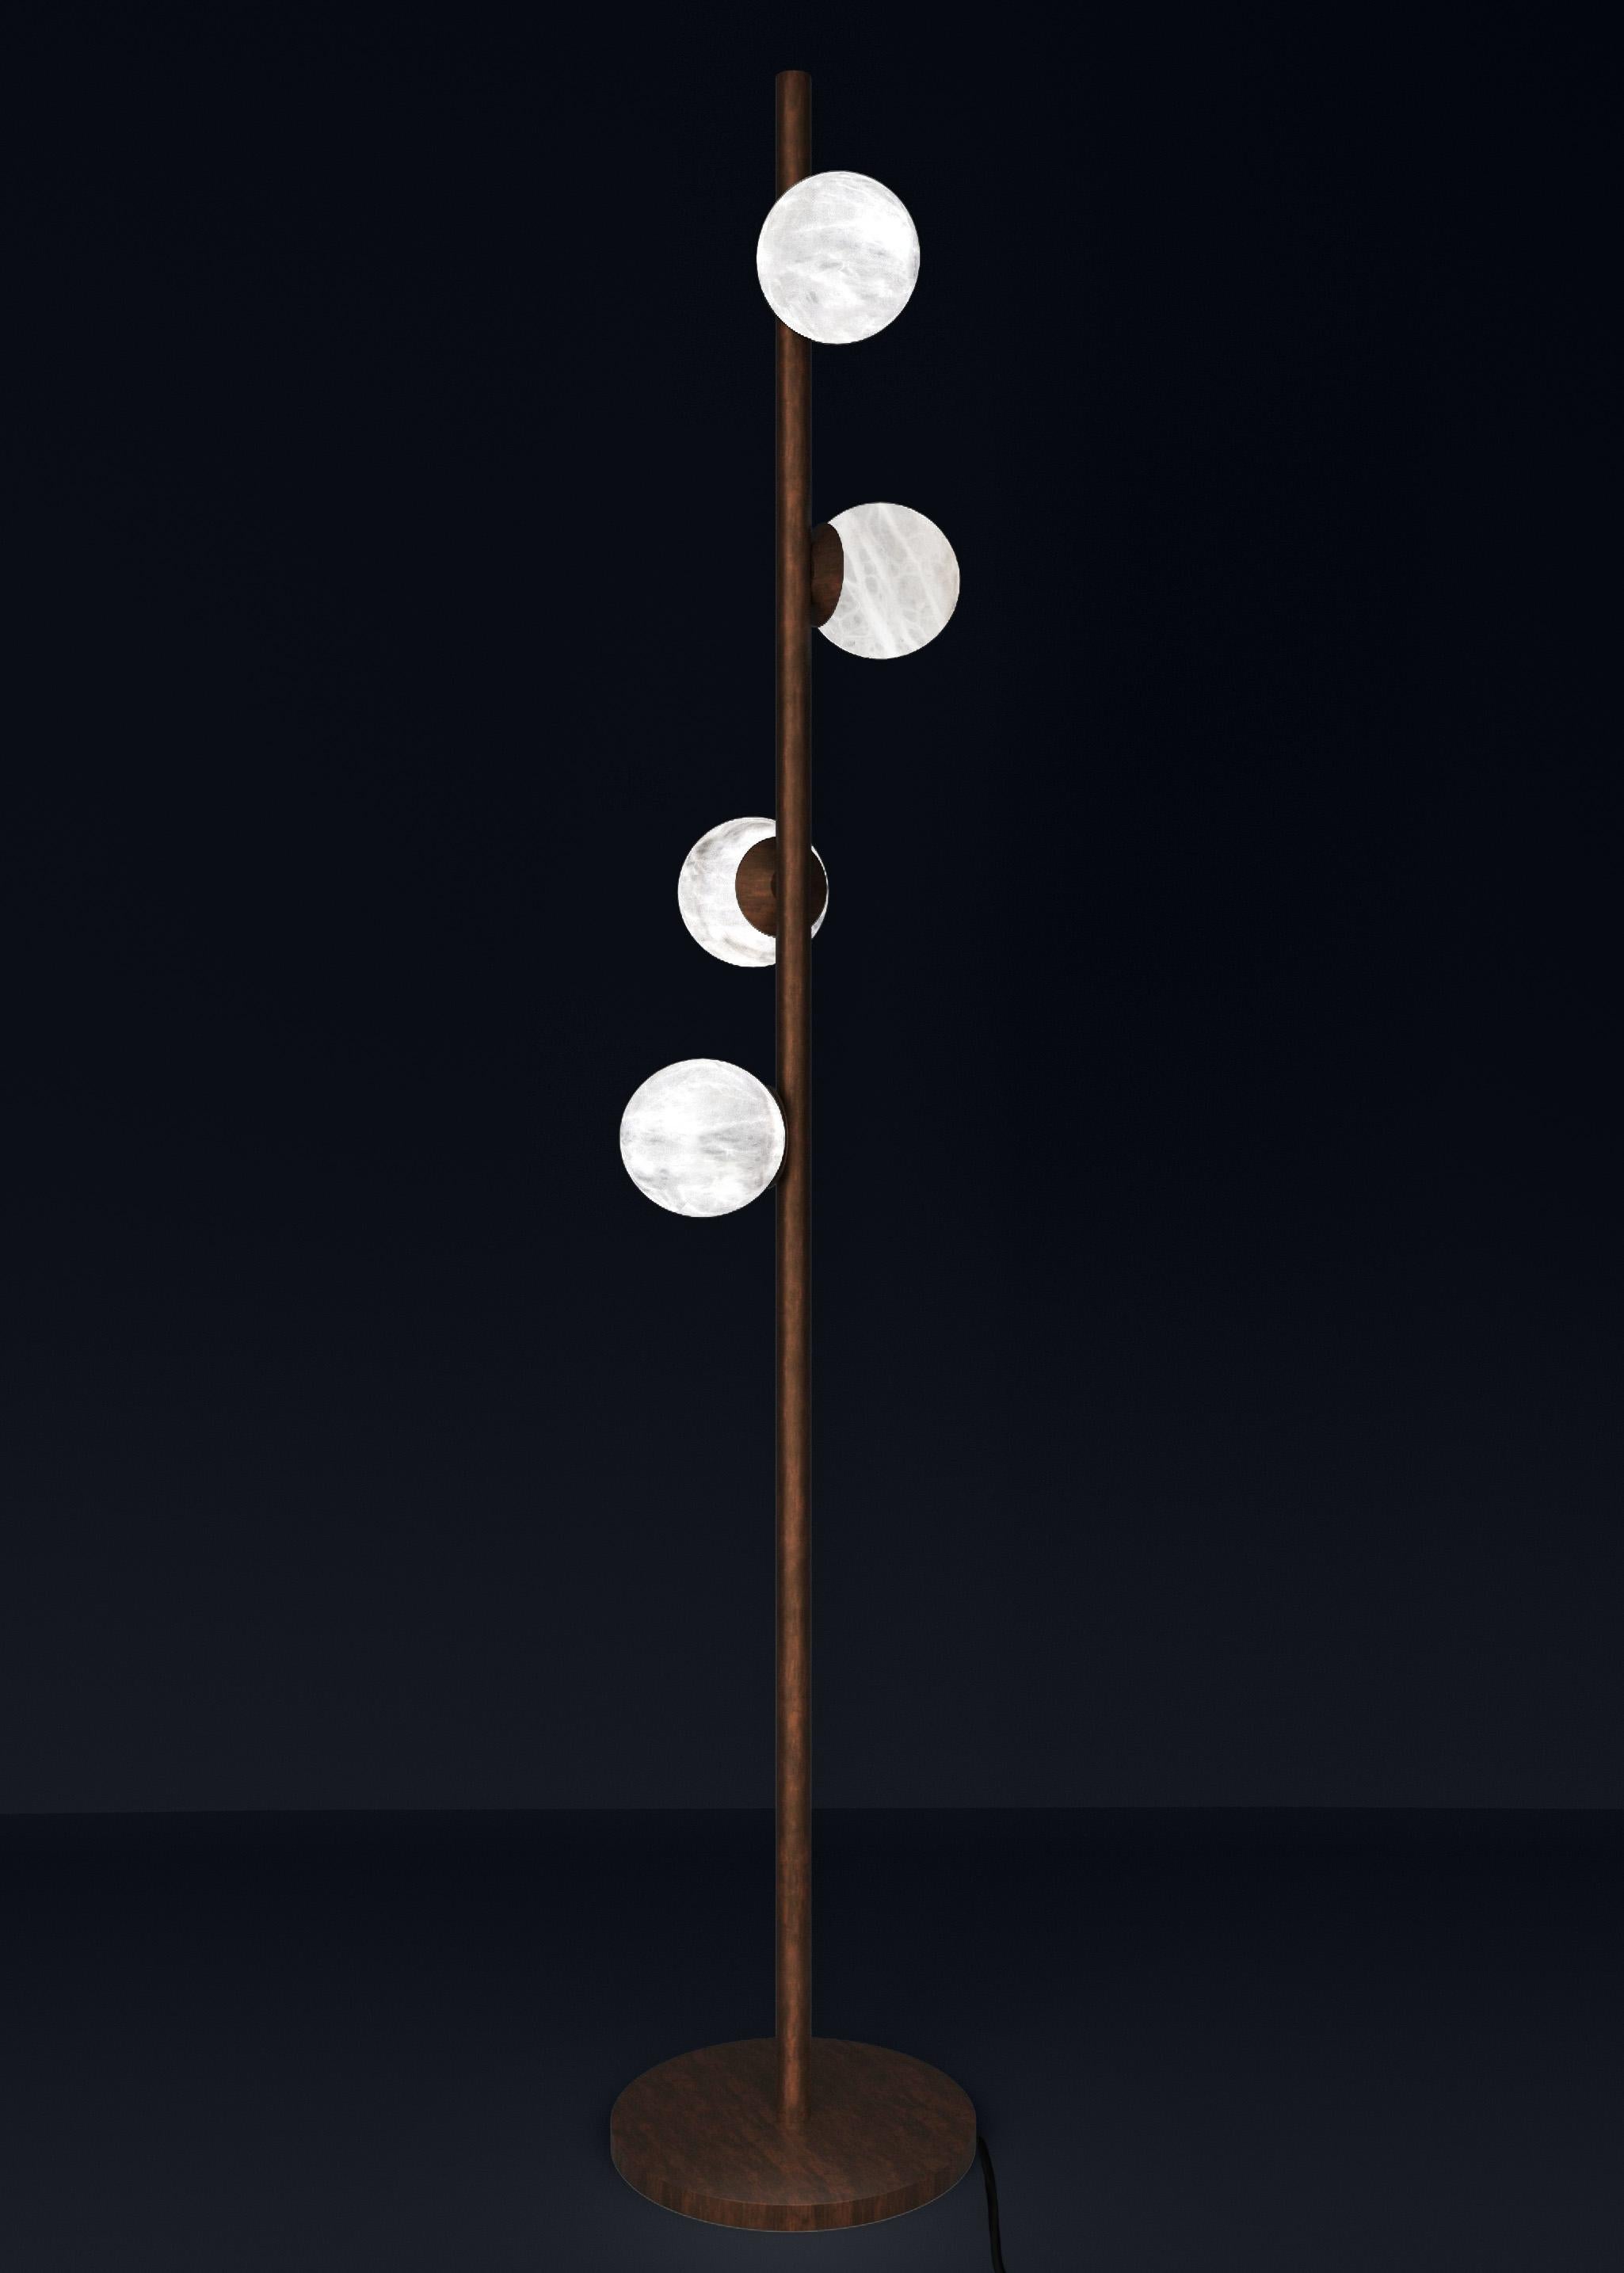 Ofione Ruggine Of Florence Metal Floor Lamp by Alabastro Italiano
Dimensions: D 50 x W 50 x H 170 cm.
Materials: White alabaster and metal.

Available in different finishes: Shiny Silver, Bronze, Brushed Brass, Matte Black, Ruggine of Florence,